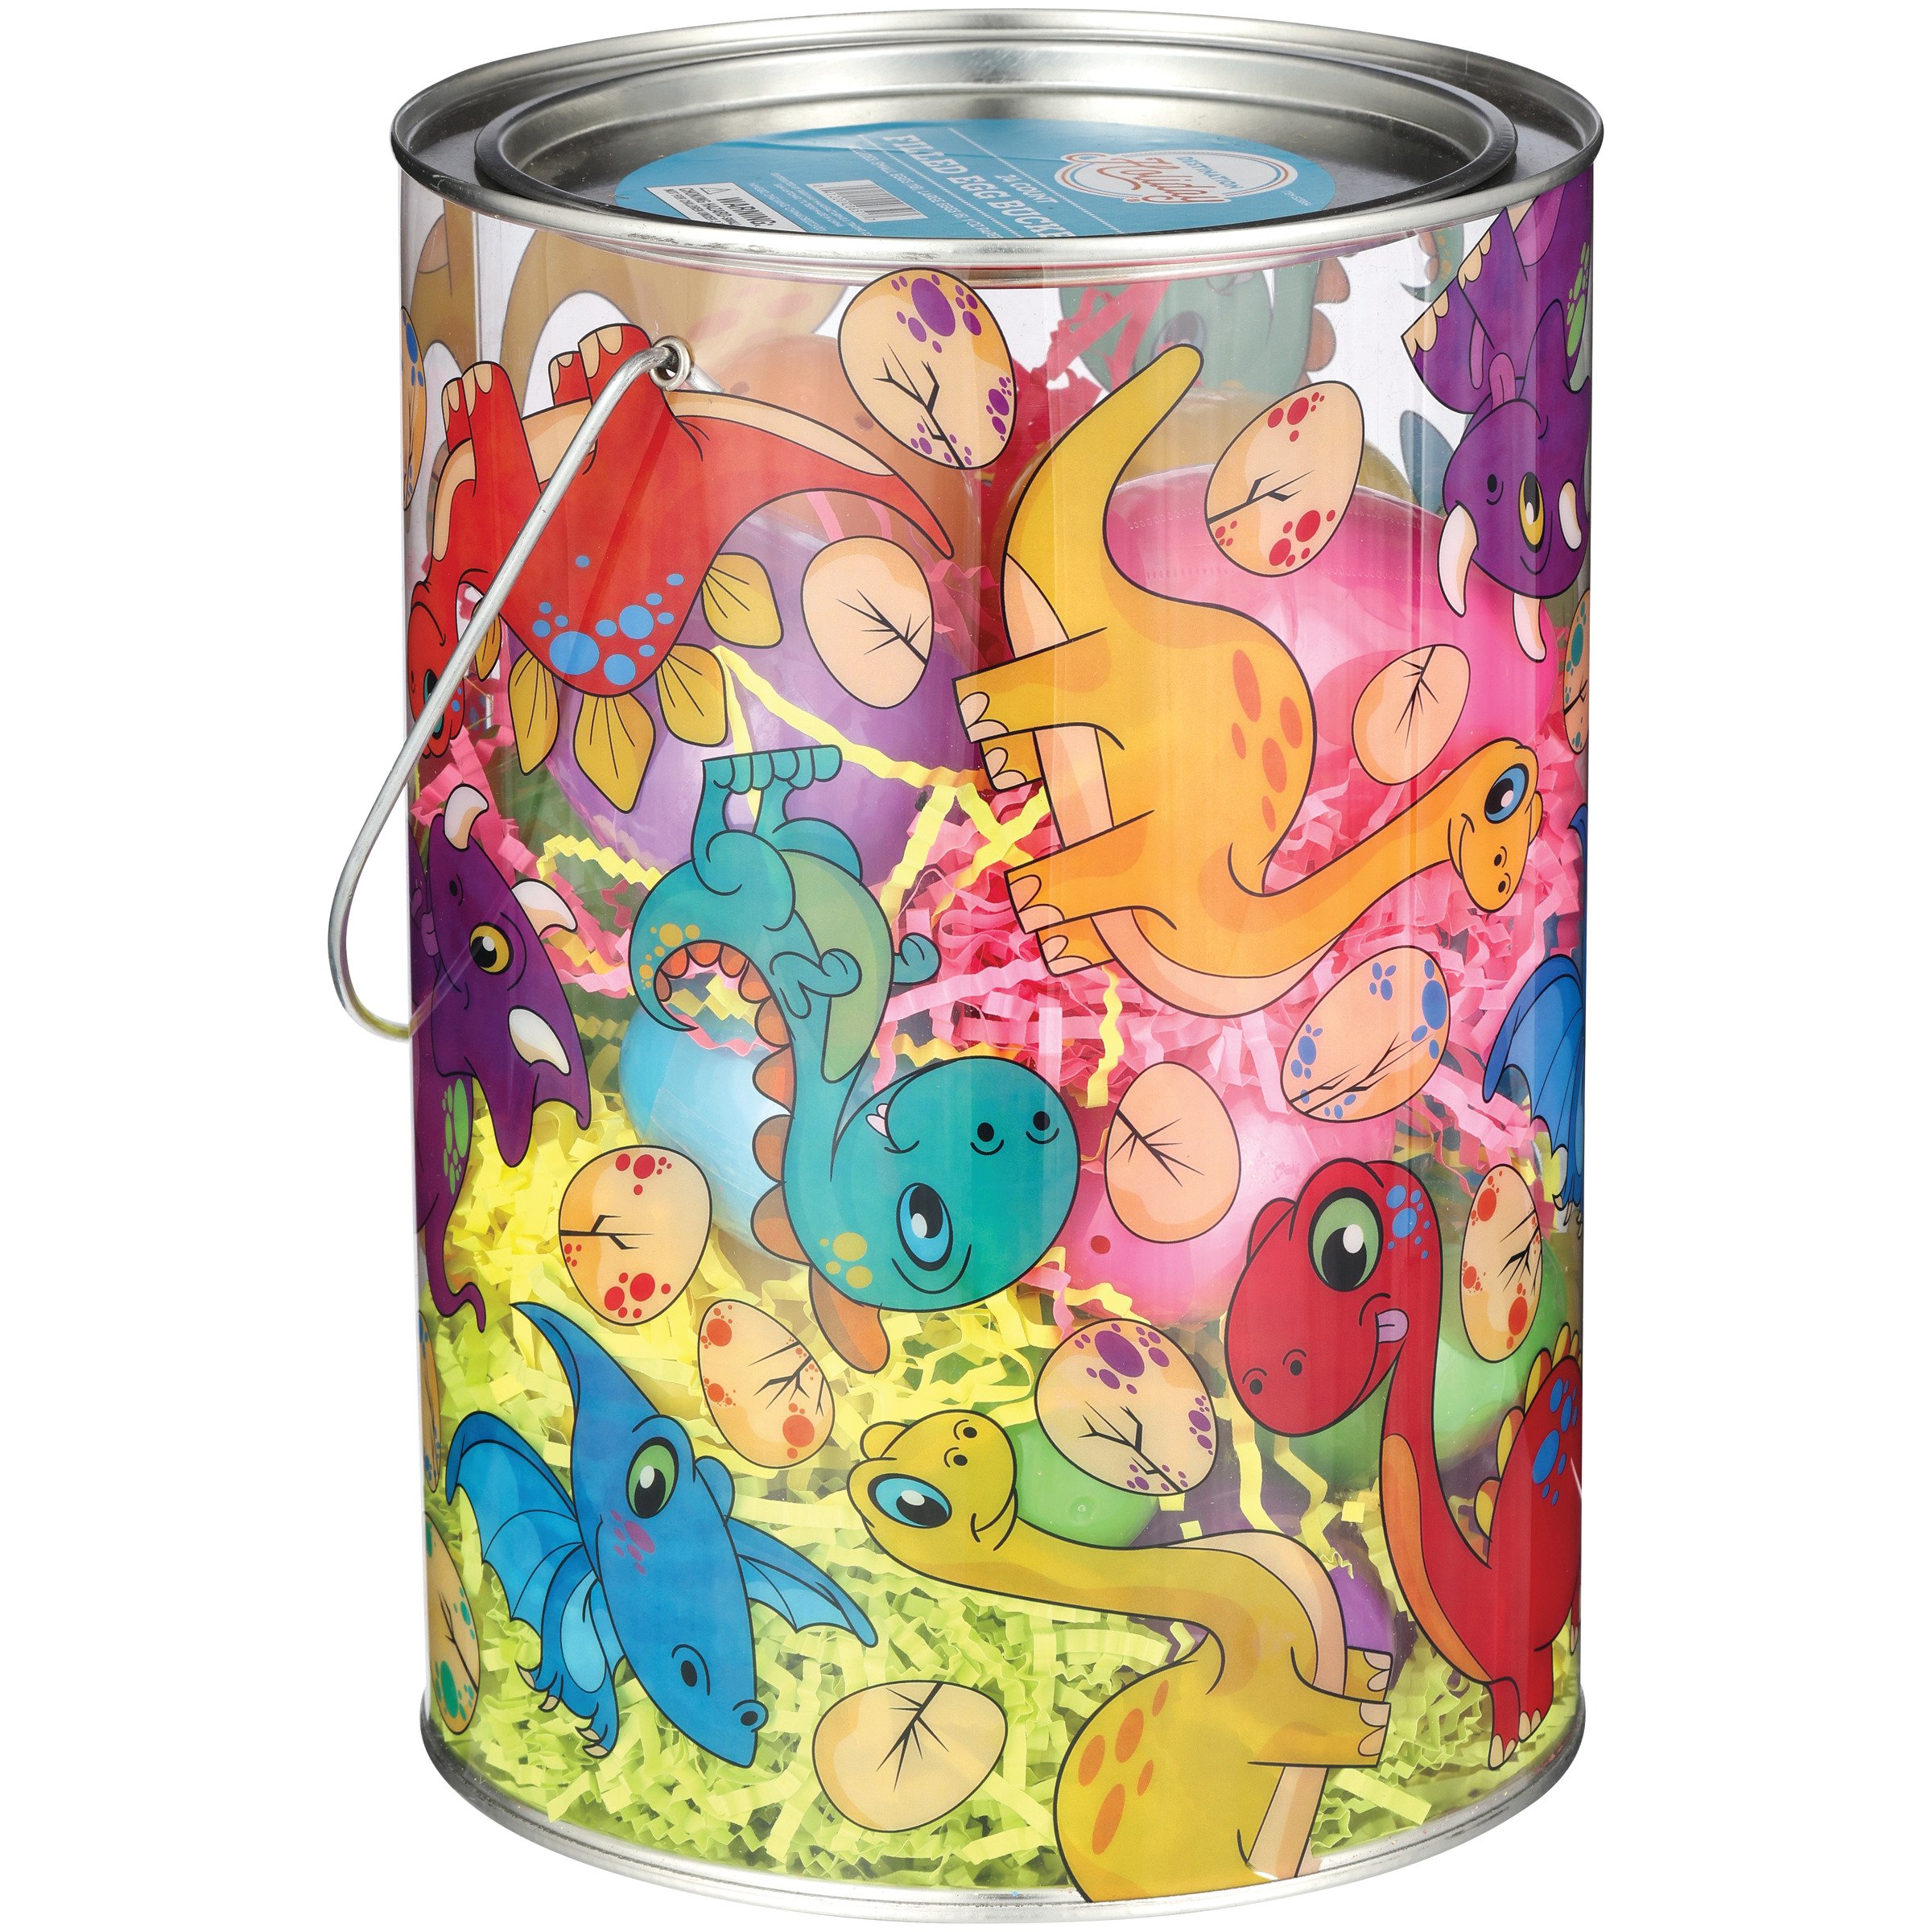 Destination Holiday Dino Filled Easter Eggs Bucket